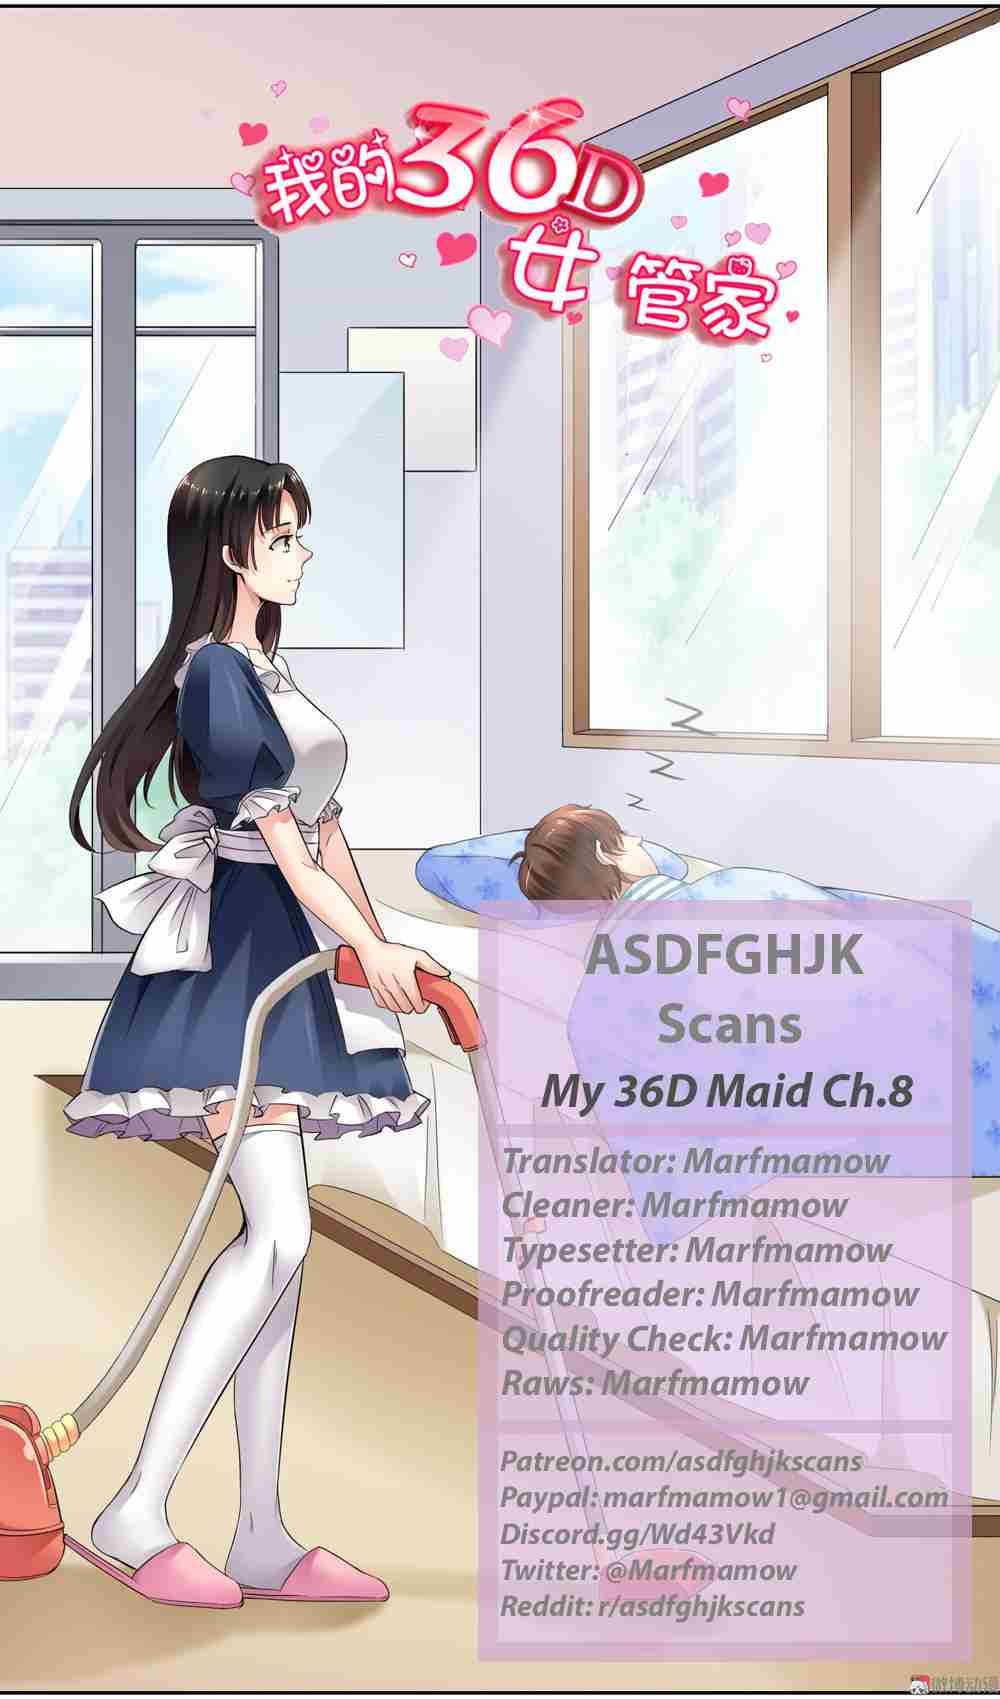 My 36D Maid Ch. 8 Experiencing commoner's public transport